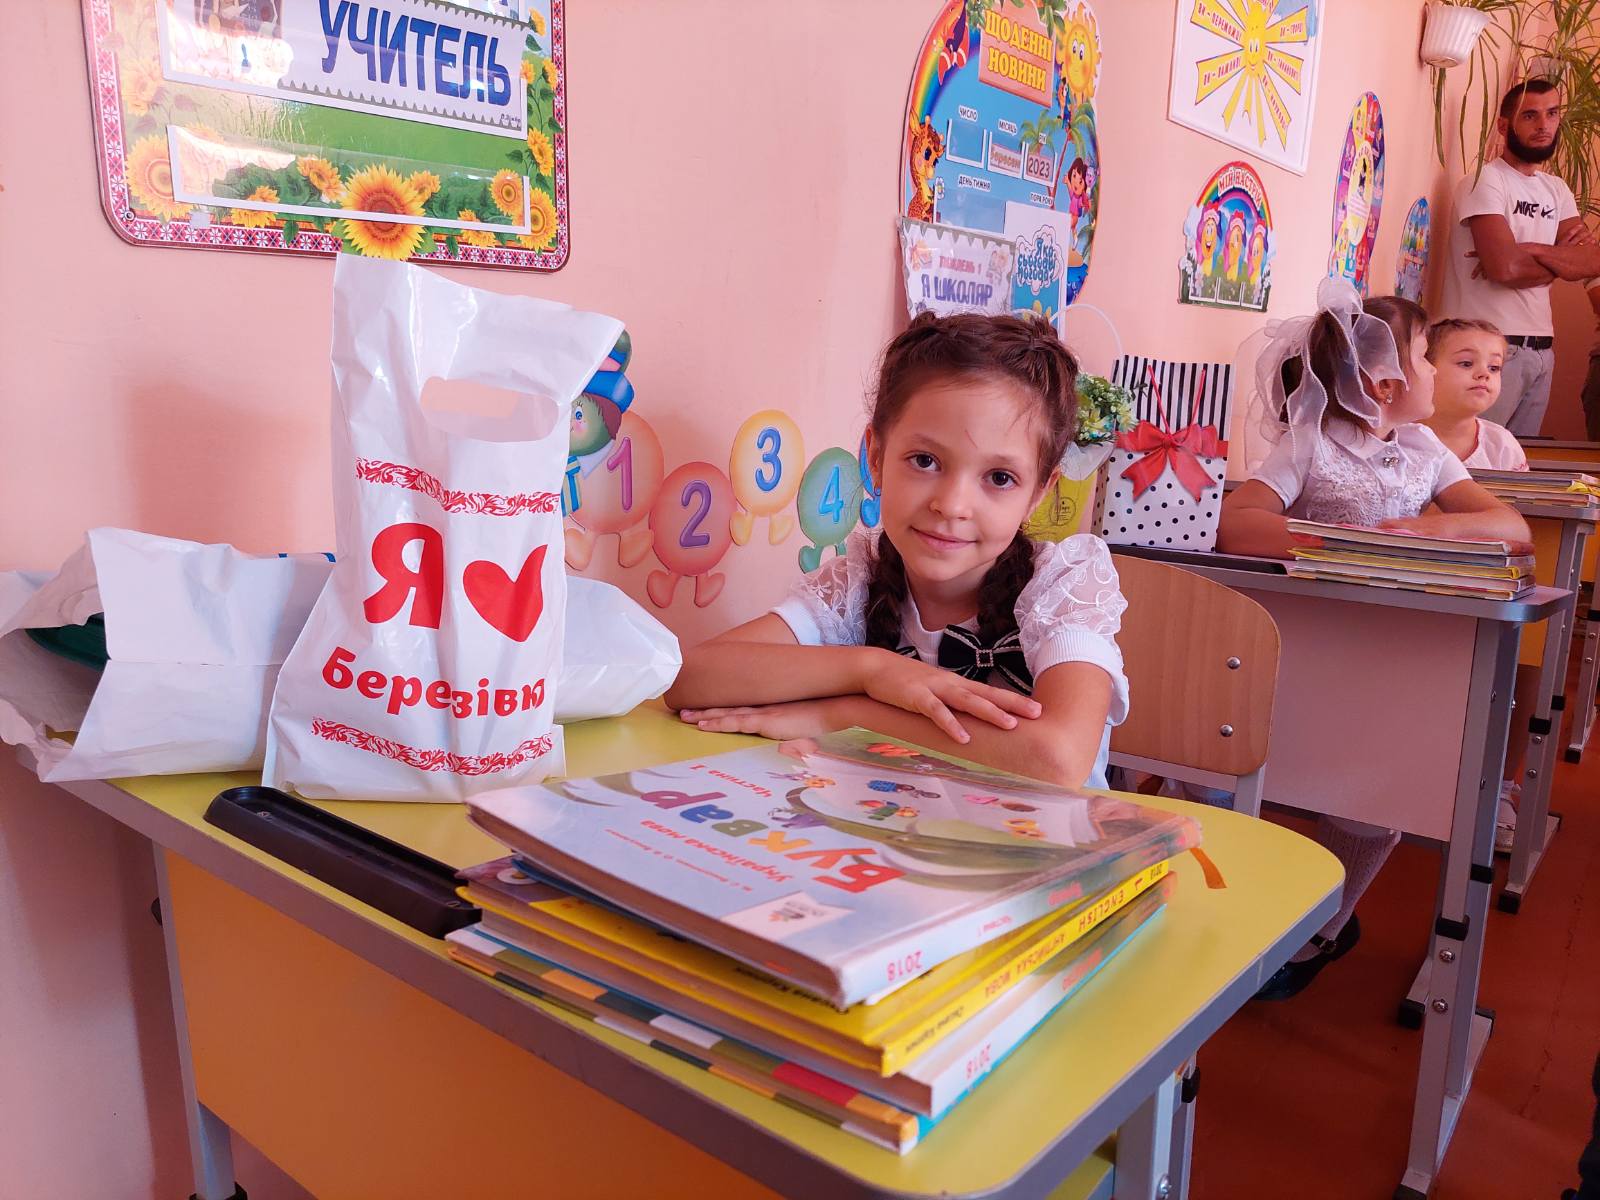 A first-grader with a branded gift